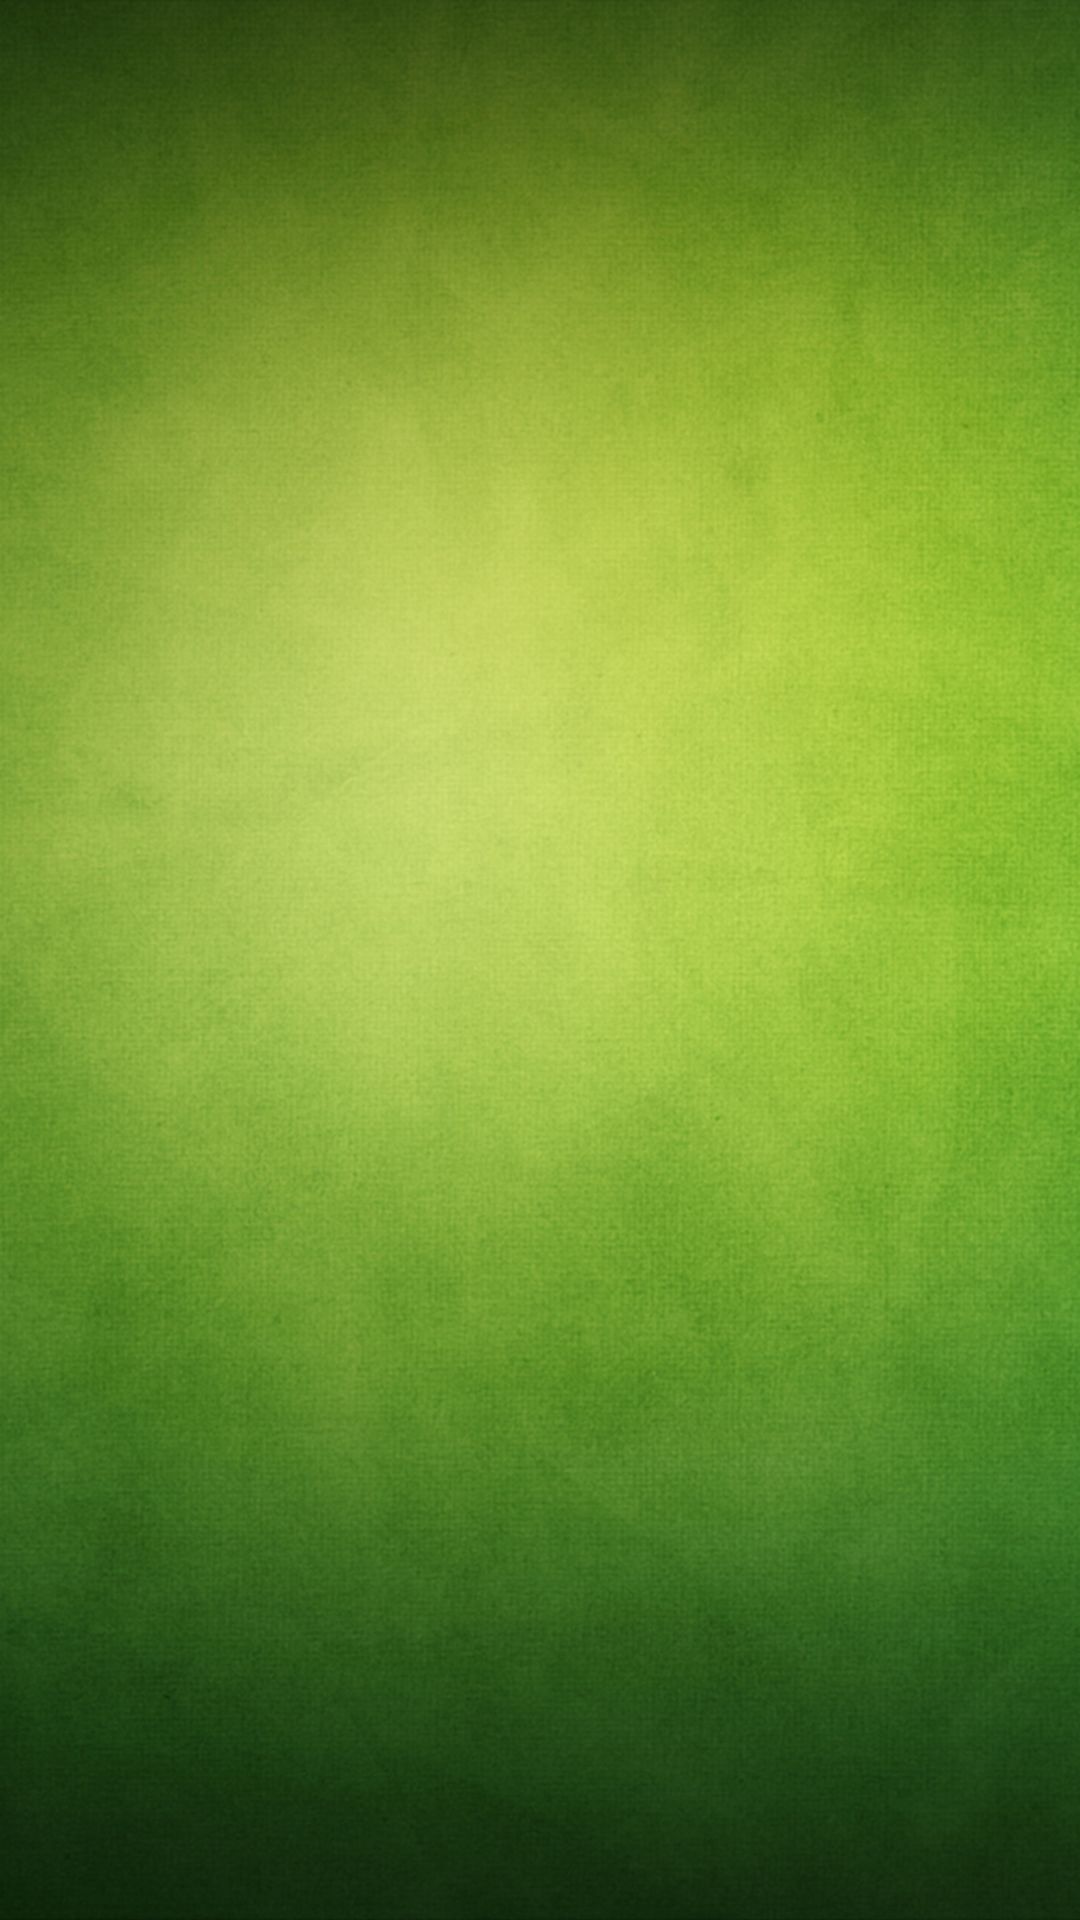 Pure Minimal Simple Green Background iPhone 6 Wallpaper Download. iPhone Wallpaper, iPad wallpaper. iPhone 5s wallpaper, Green background, iPhone 6 wallpaper